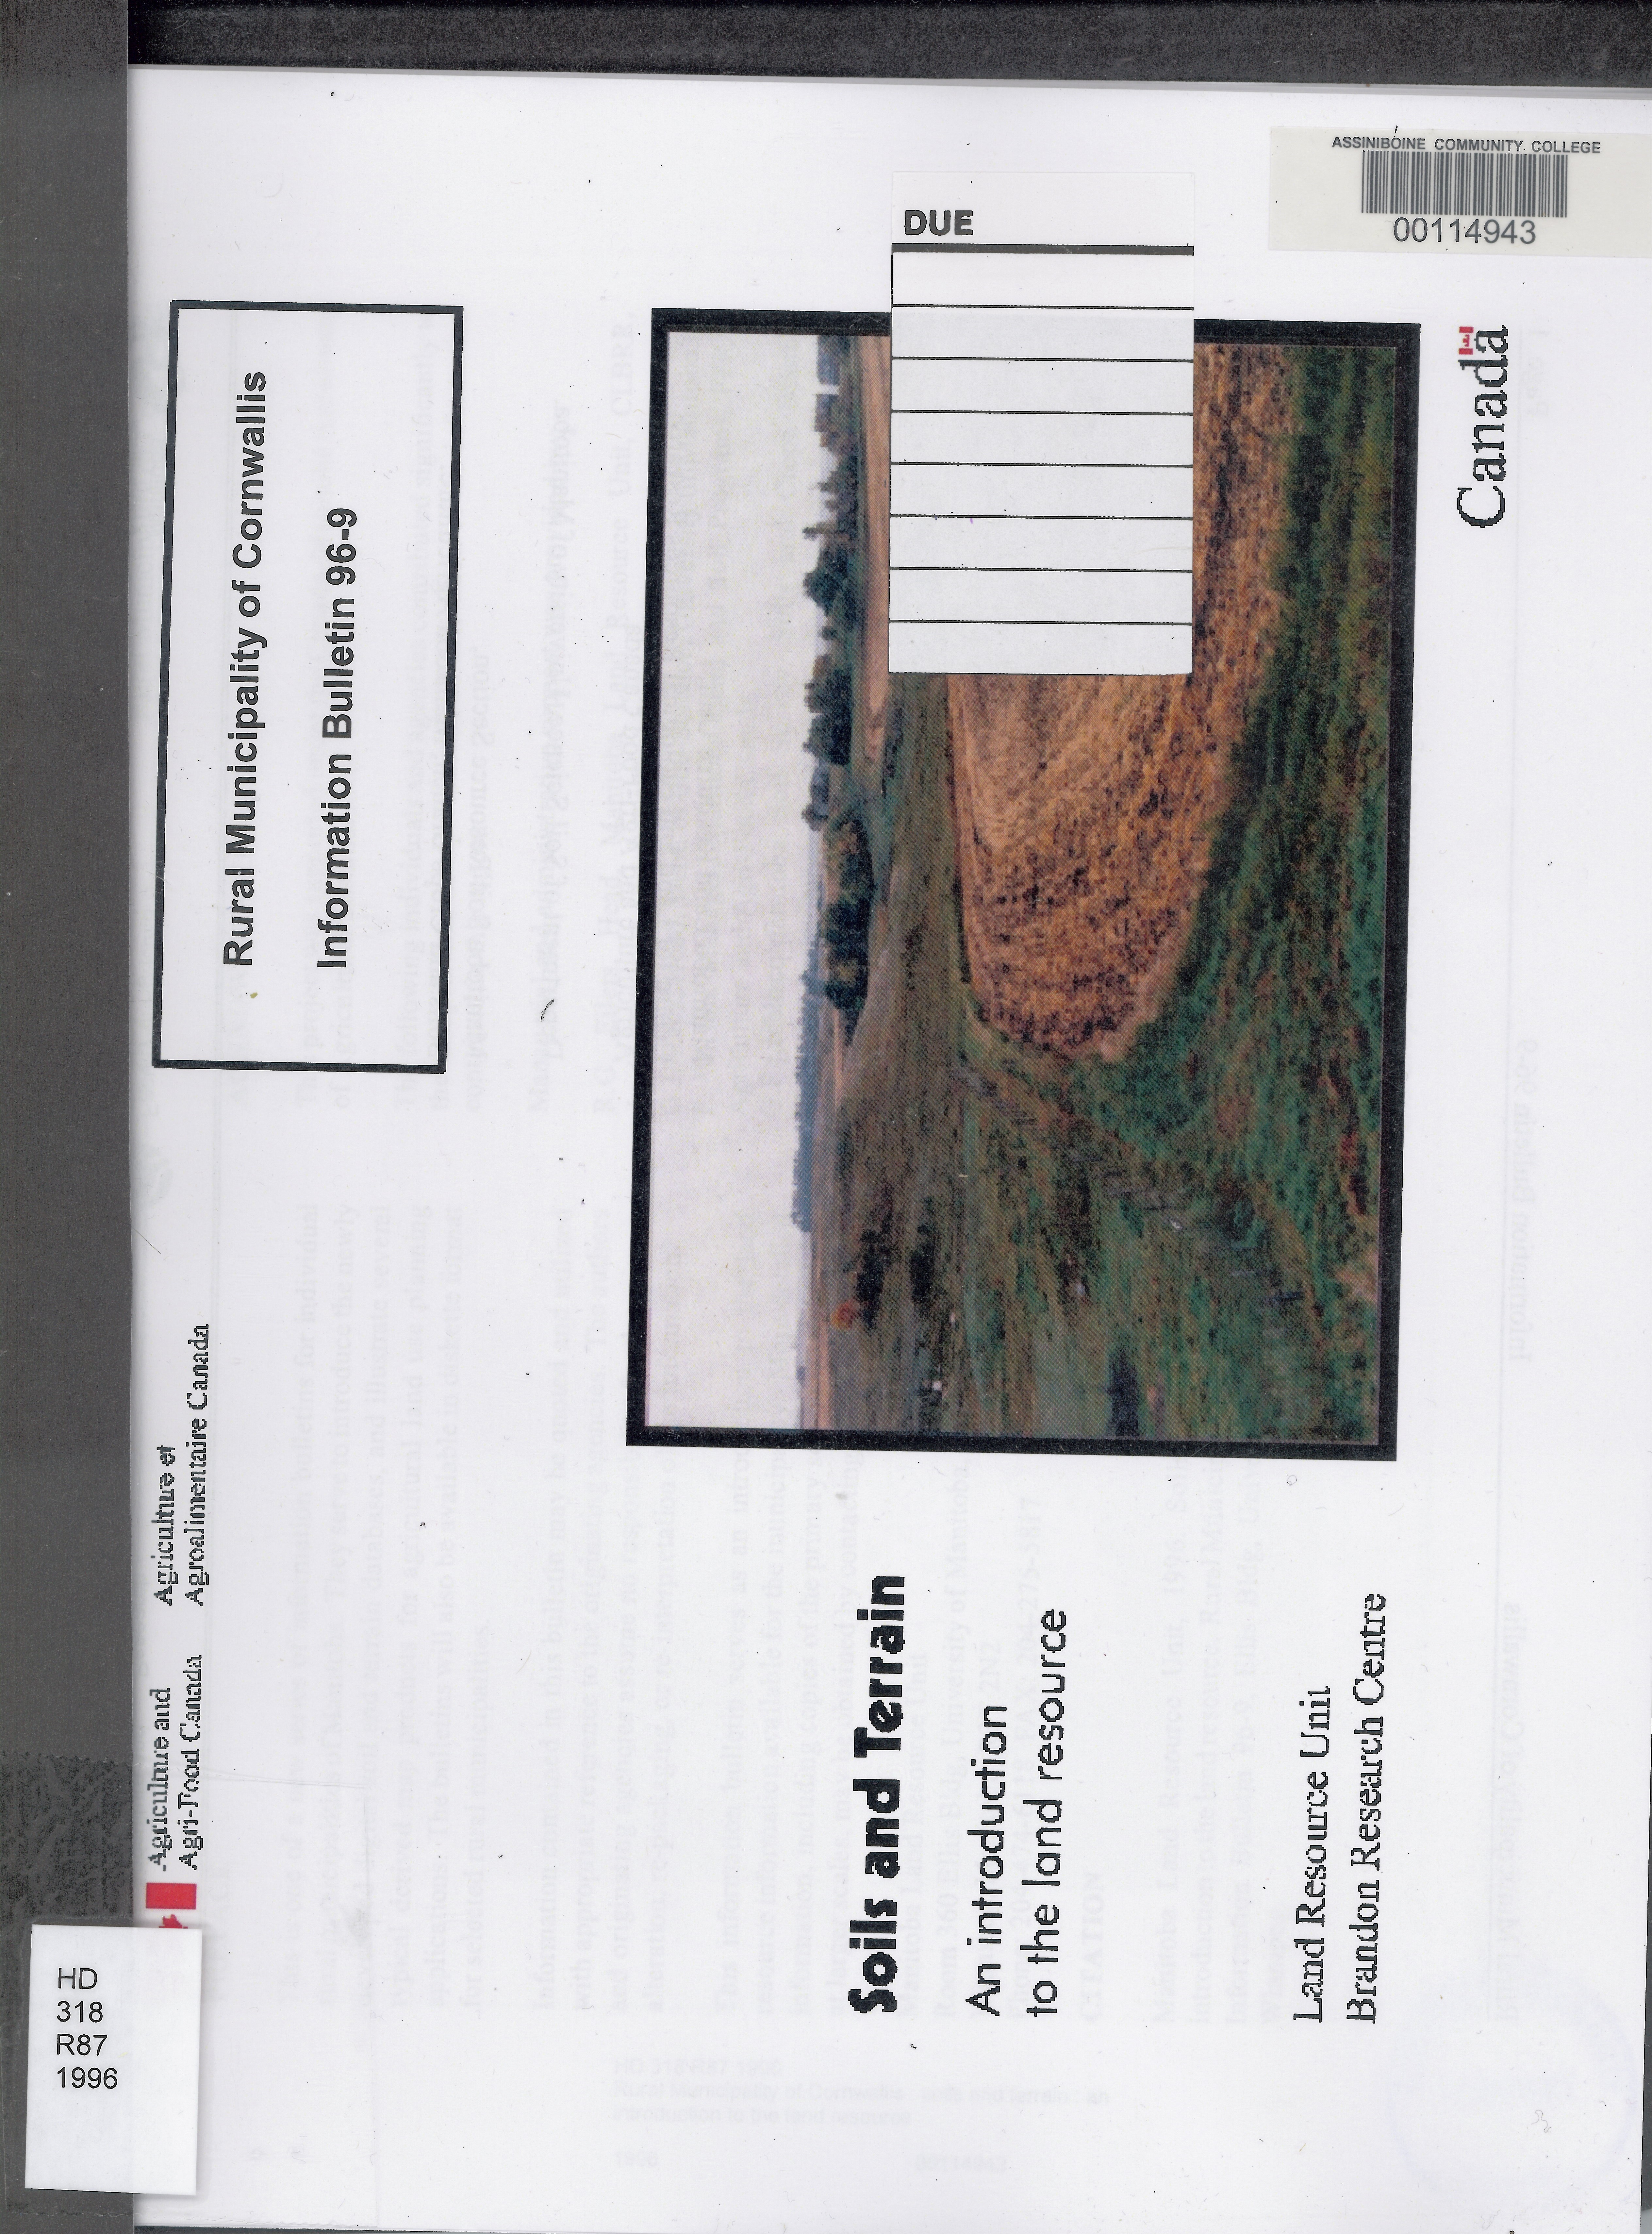 Rural Municipality of Cornwallis : soils and terrain : an introduction to the land resource